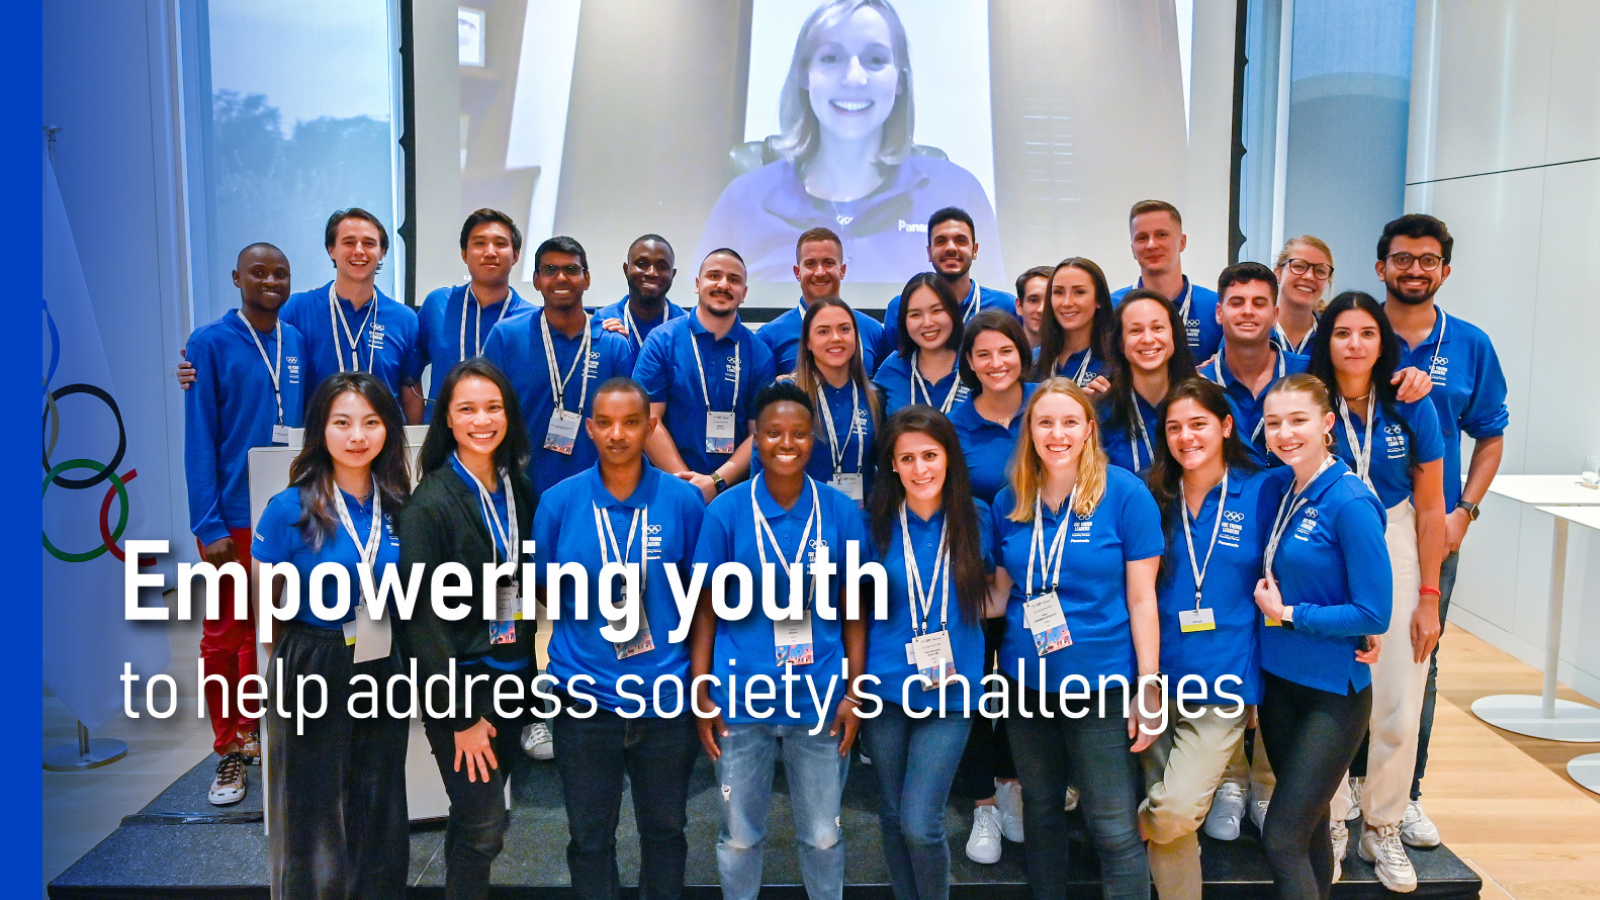 Image: Empowering youth to help address society’s challenges